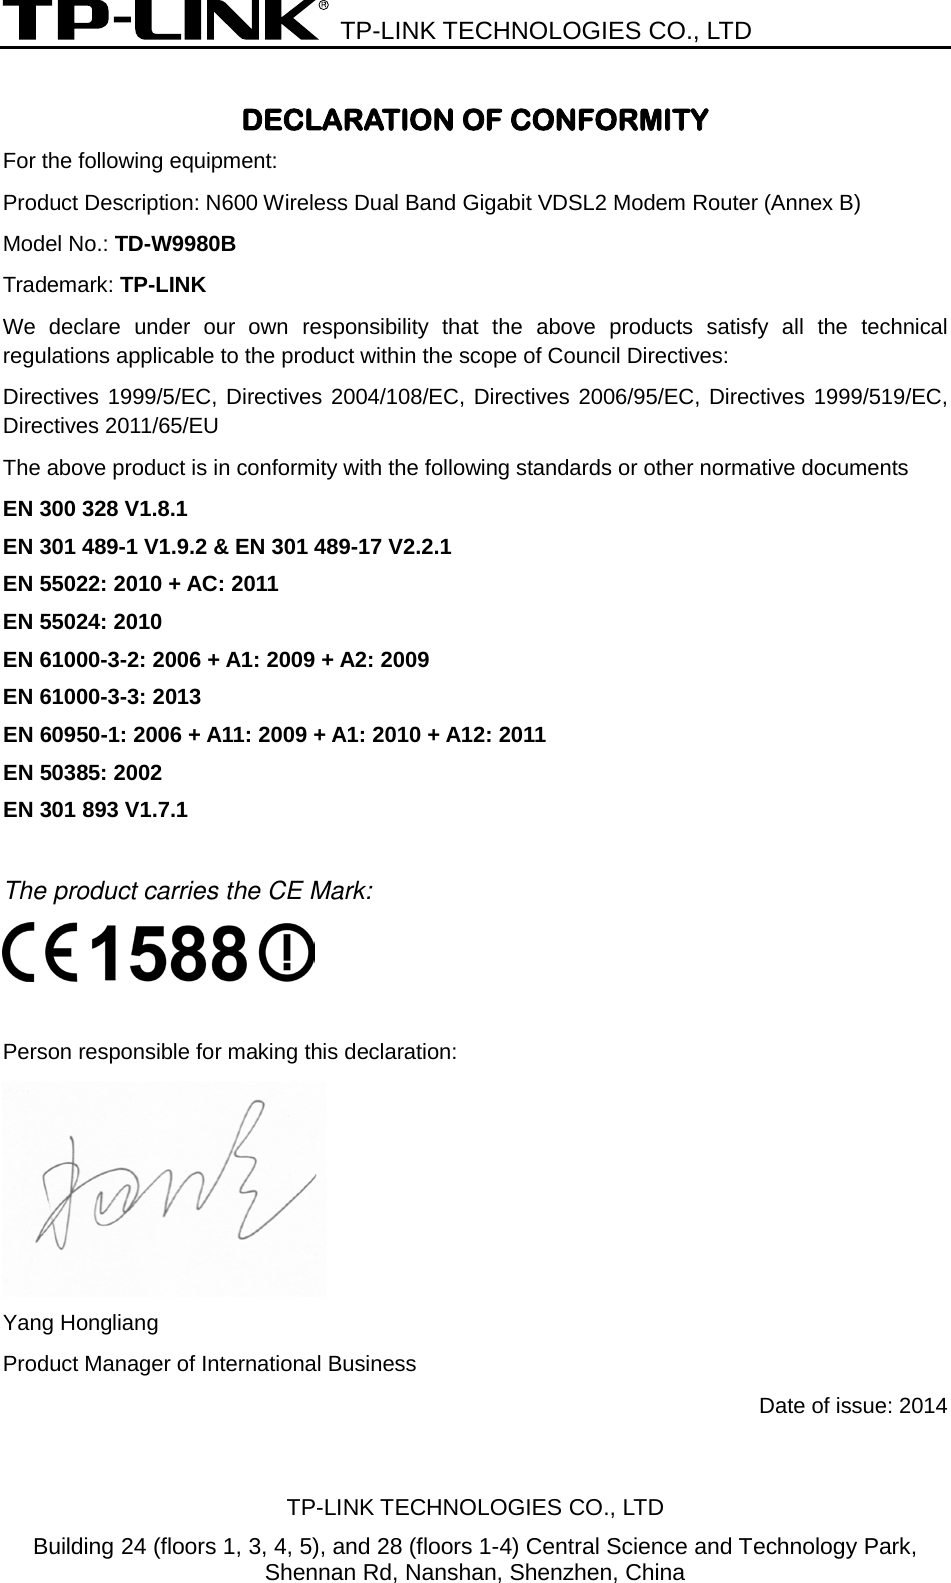  TP-LINK TECHNOLOGIES CO., LTD  DECLARATION OF CONFORMITY For the following equipment: Product Description: N600 Wireless Dual Band Gigabit VDSL2 Modem Router (Annex B) Model No.: TD-W9980B Trademark: TP-LINK We declare under our own responsibility that the above products satisfy all the technical regulations applicable to the product within the scope of Council Directives:     Directives 1999/5/EC, Directives 2004/108/EC, Directives 2006/95/EC, Directives 1999/519/EC, Directives 2011/65/EU The above product is in conformity with the following standards or other normative documents EN 300 328 V1.8.1     EN 301 489-1 V1.9.2 &amp; EN 301 489-17 V2.2.1     EN 55022: 2010 + AC: 2011    EN 55024: 2010   EN 61000-3-2: 2006 + A1: 2009 + A2: 2009   EN 61000-3-3: 2013    EN 60950-1: 2006 + A11: 2009 + A1: 2010 + A12: 2011     EN 50385: 2002   EN 301 893 V1.7.1  The product carries the CE Mark:   Person responsible for making this declaration:  Yang Hongliang Product Manager of International Business   Date of issue: 2014 TP-LINK TECHNOLOGIES CO., LTD Building 24 (floors 1, 3, 4, 5), and 28 (floors 1-4) Central Science and Technology Park, Shennan Rd, Nanshan, Shenzhen, China 